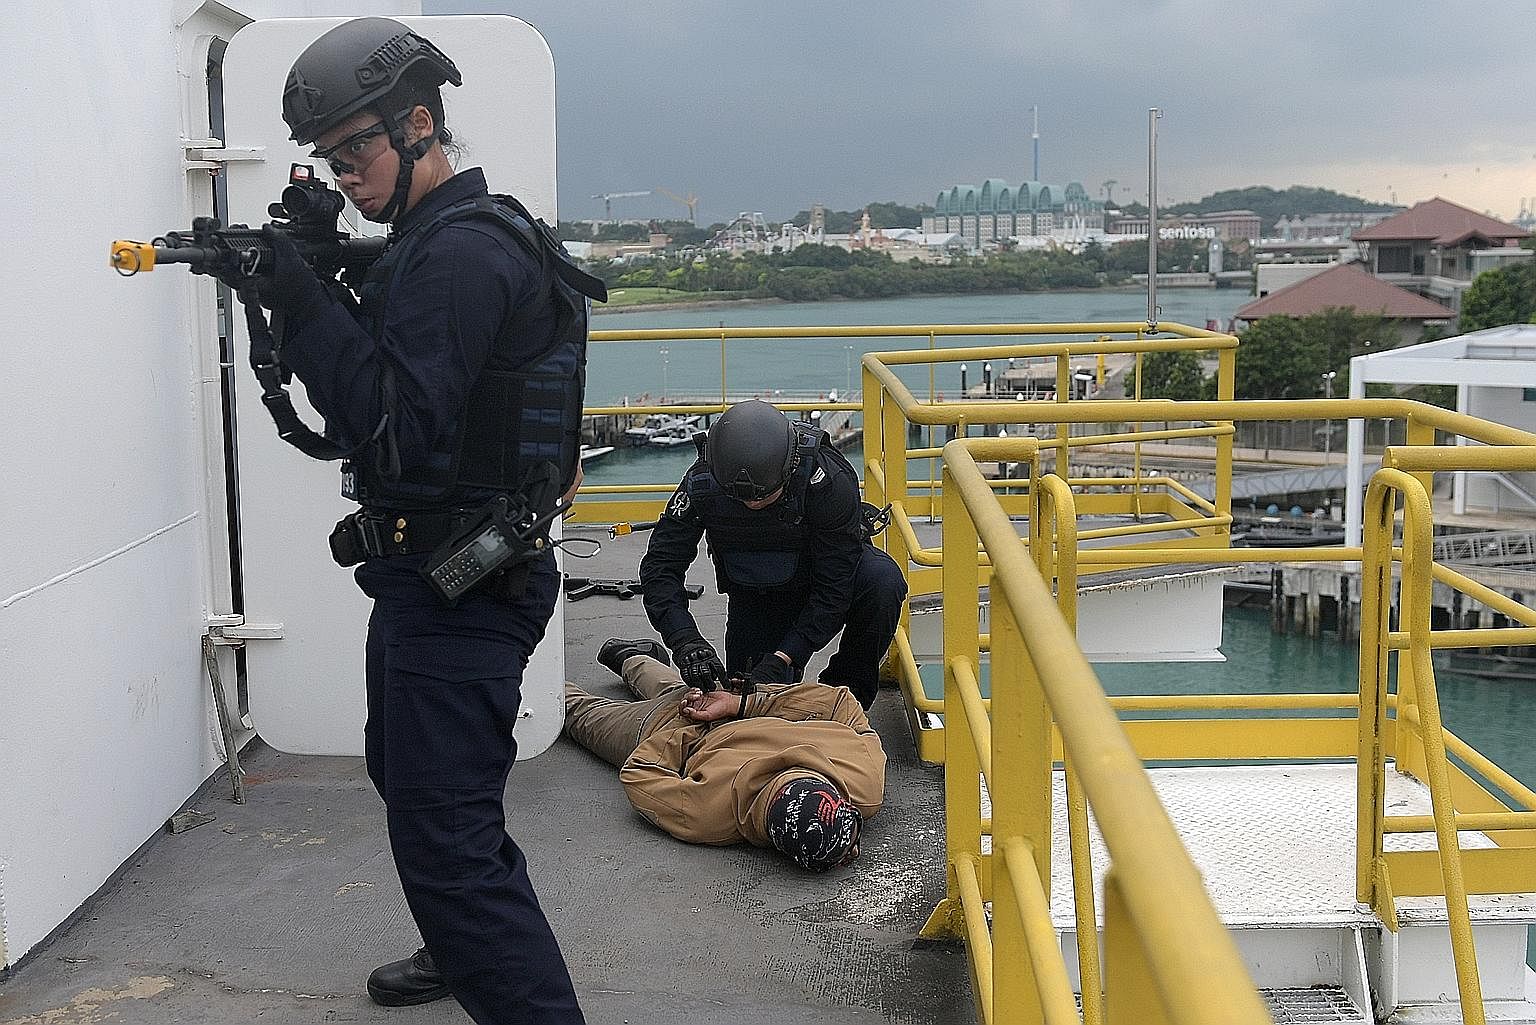 In an exercise on the Board and Search Trainer, Police Coast Guard Emergency Response Team officers stormed a room to locate a ship's crew. The team also looked for two suspicious men who had been reportedly sighted on the vessel by the ship's captai